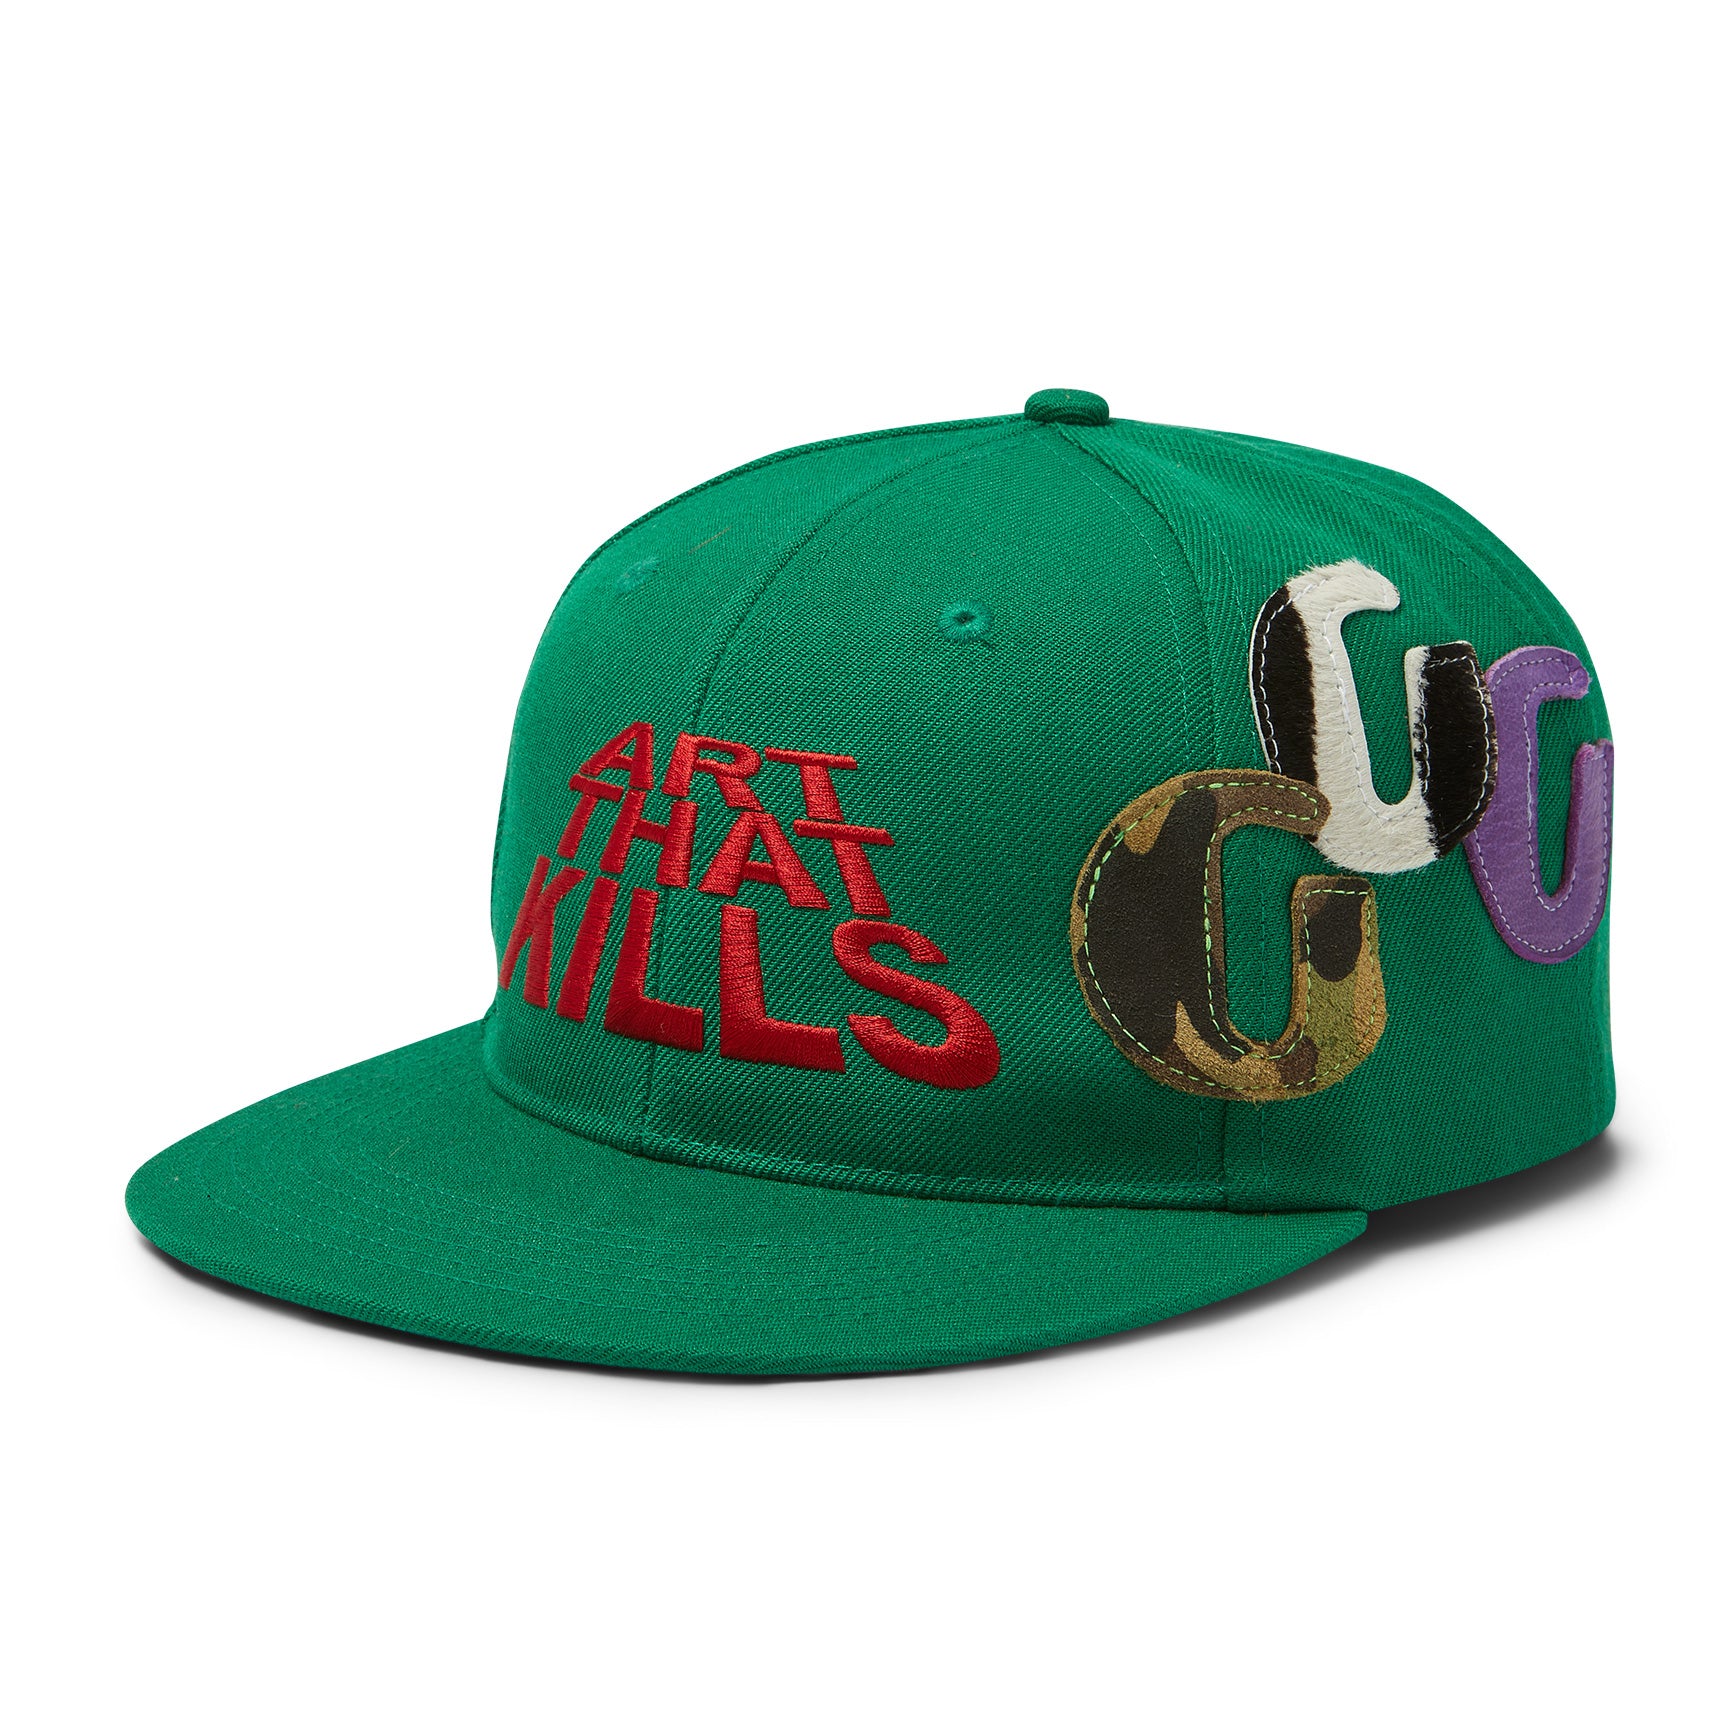 ATK G-PATCH FITTED GREEN CAP - Gallery Dept.